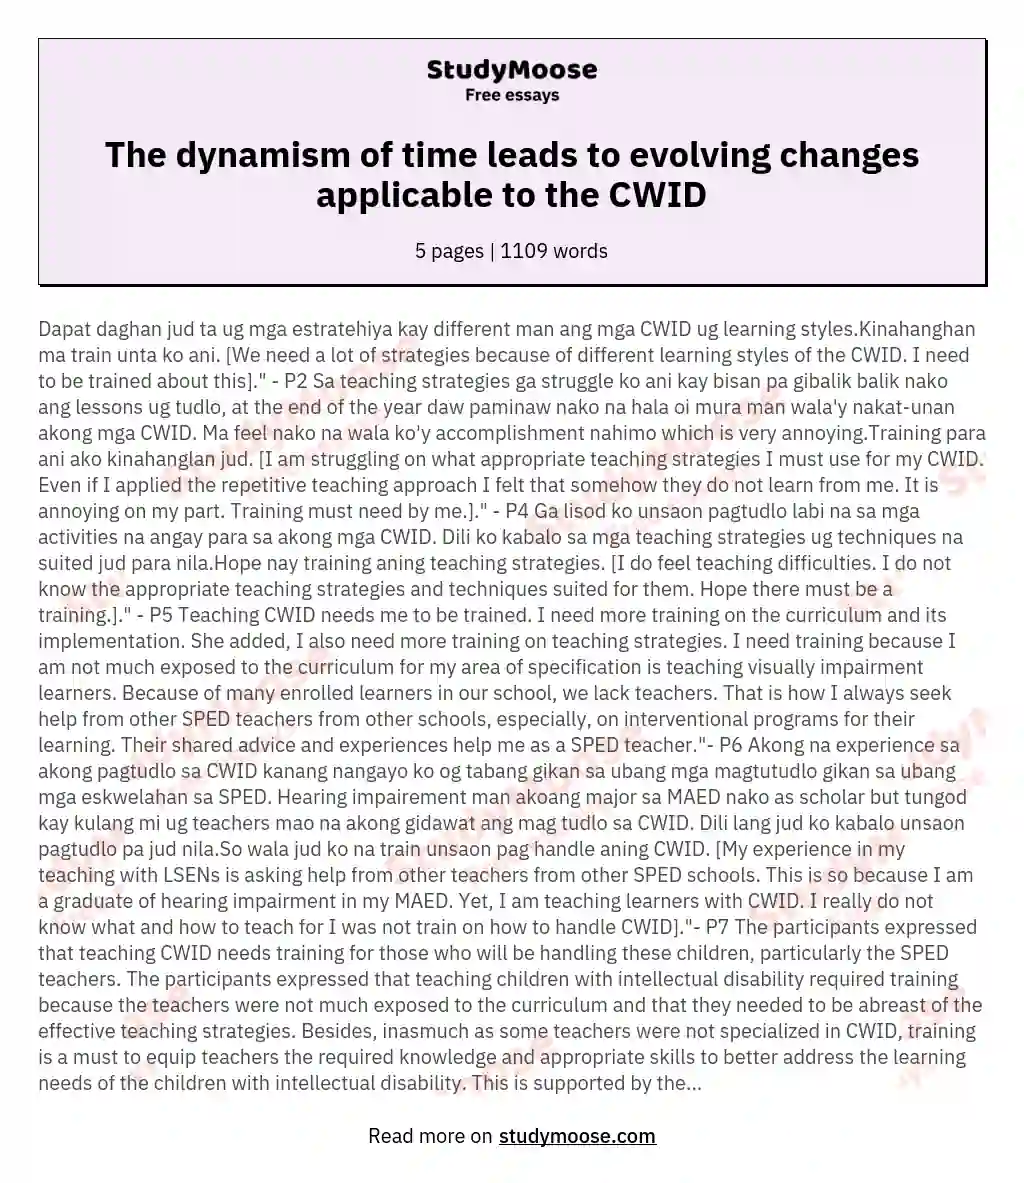 The dynamism of time leads to evolving changes applicable to the CWID essay